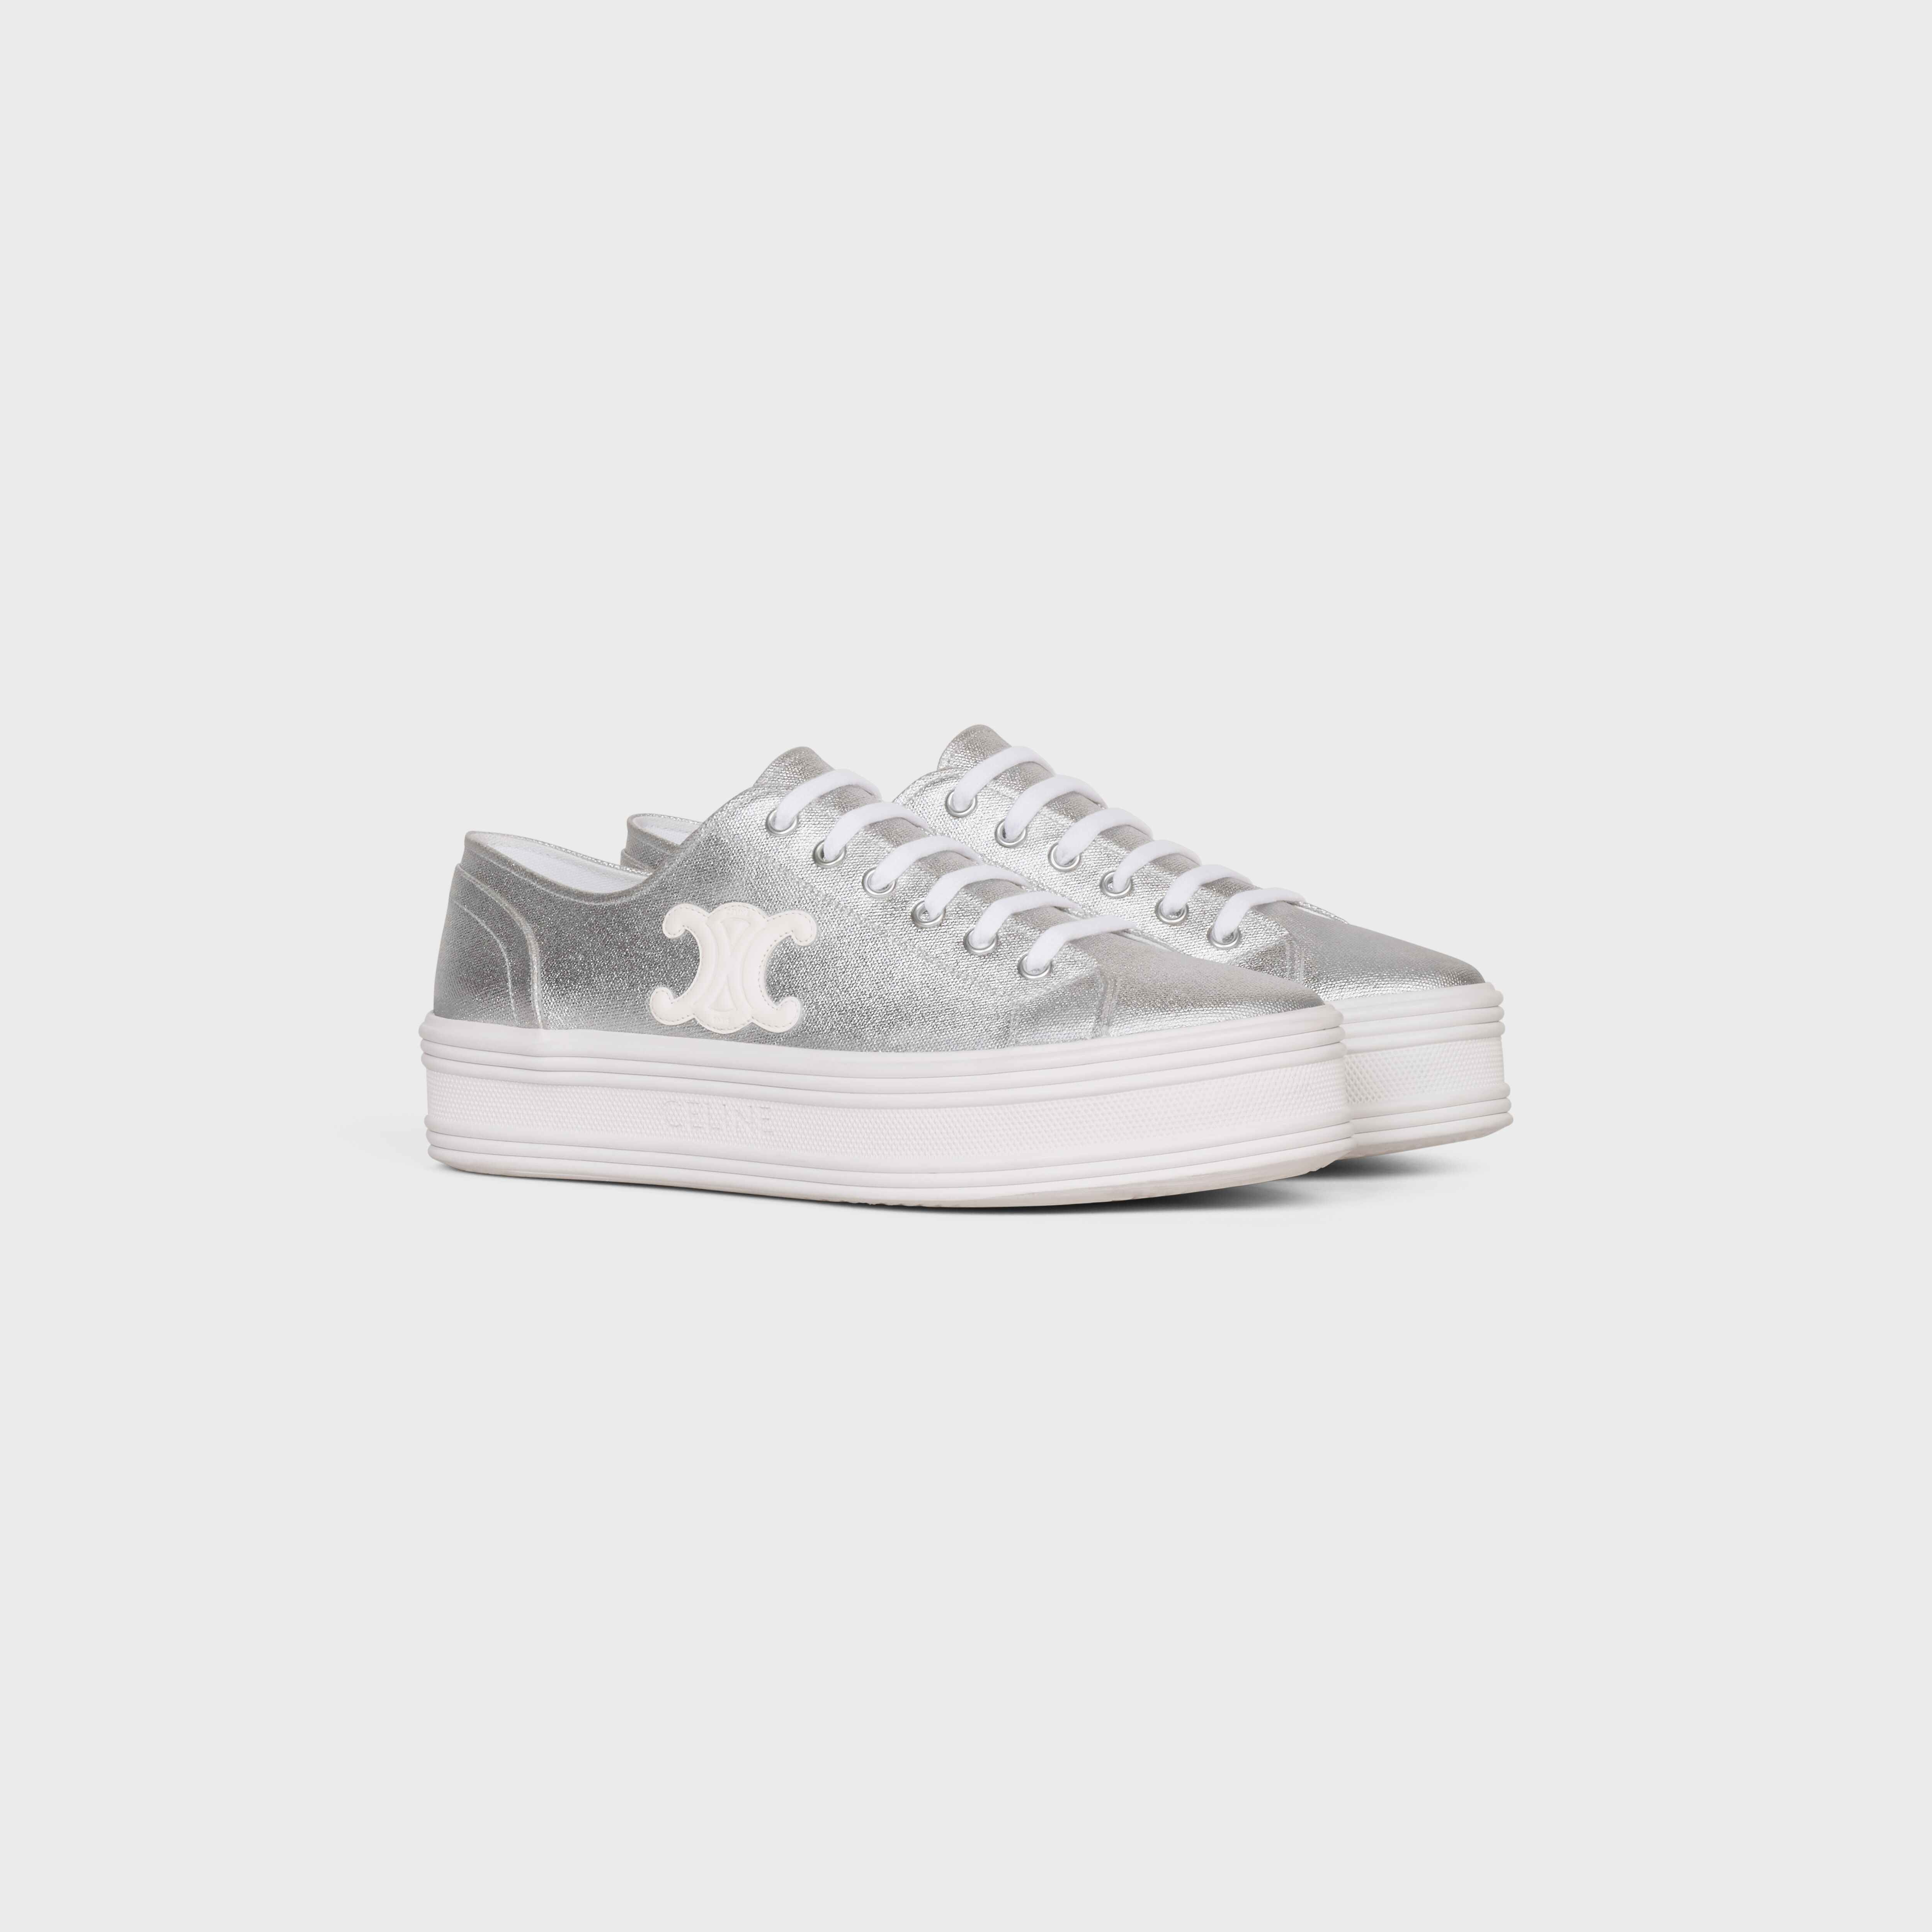 JANE LOW LACE-UP SNEAKER in METALLIC CANVAS AND CALFSKIN - 2